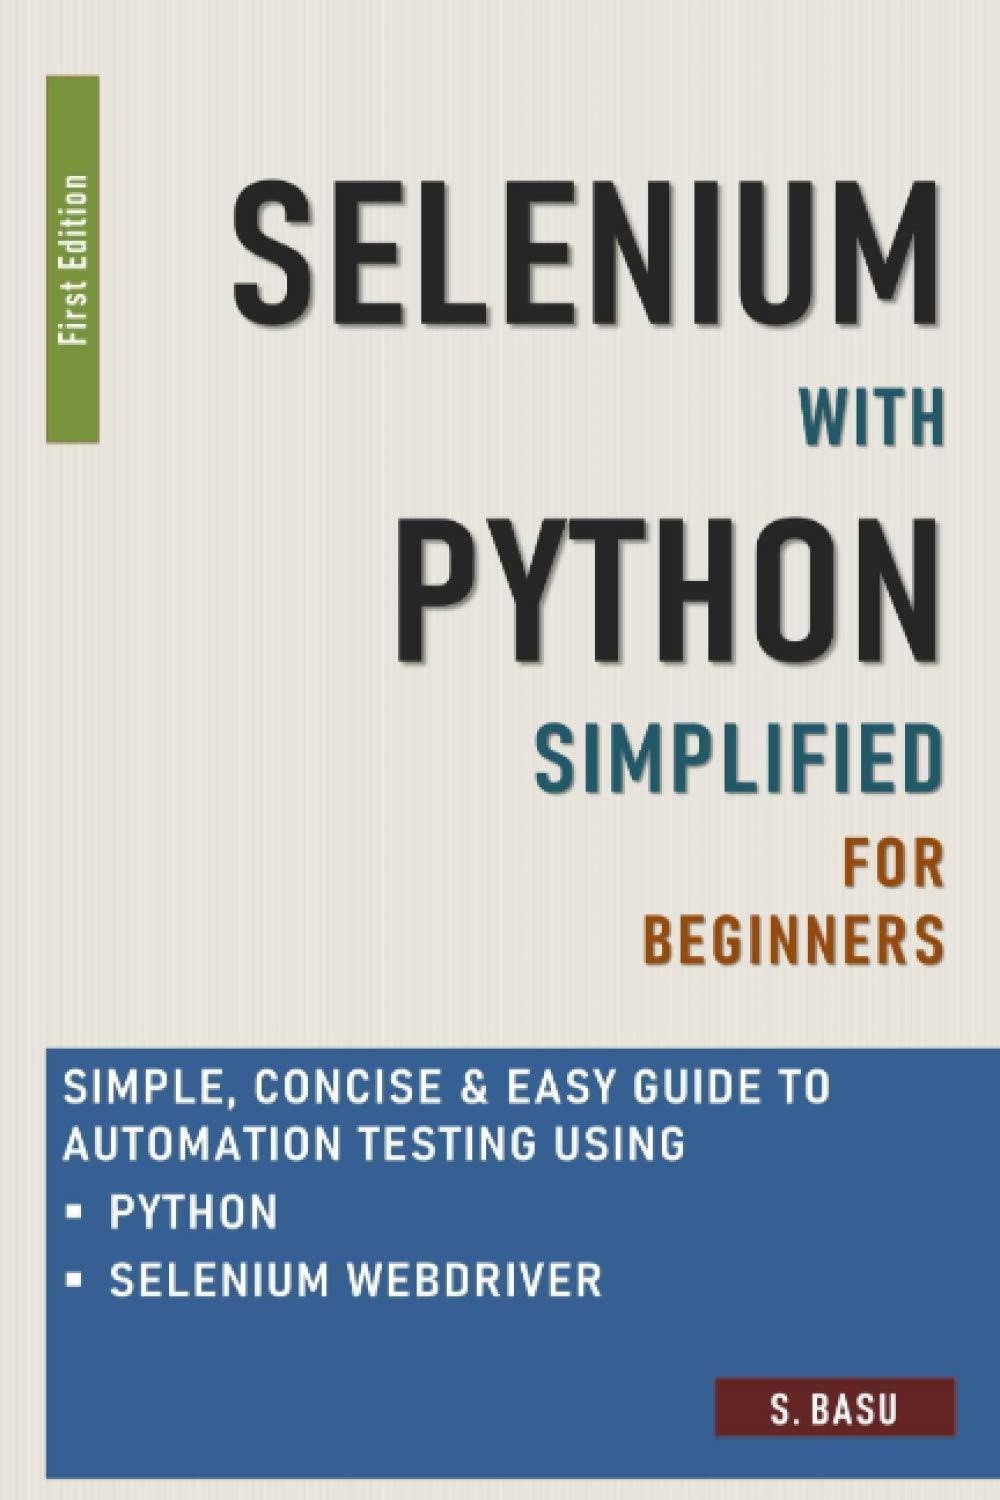 selenium with python simplified for beginners  simple concise  easy guide to automation testing using python